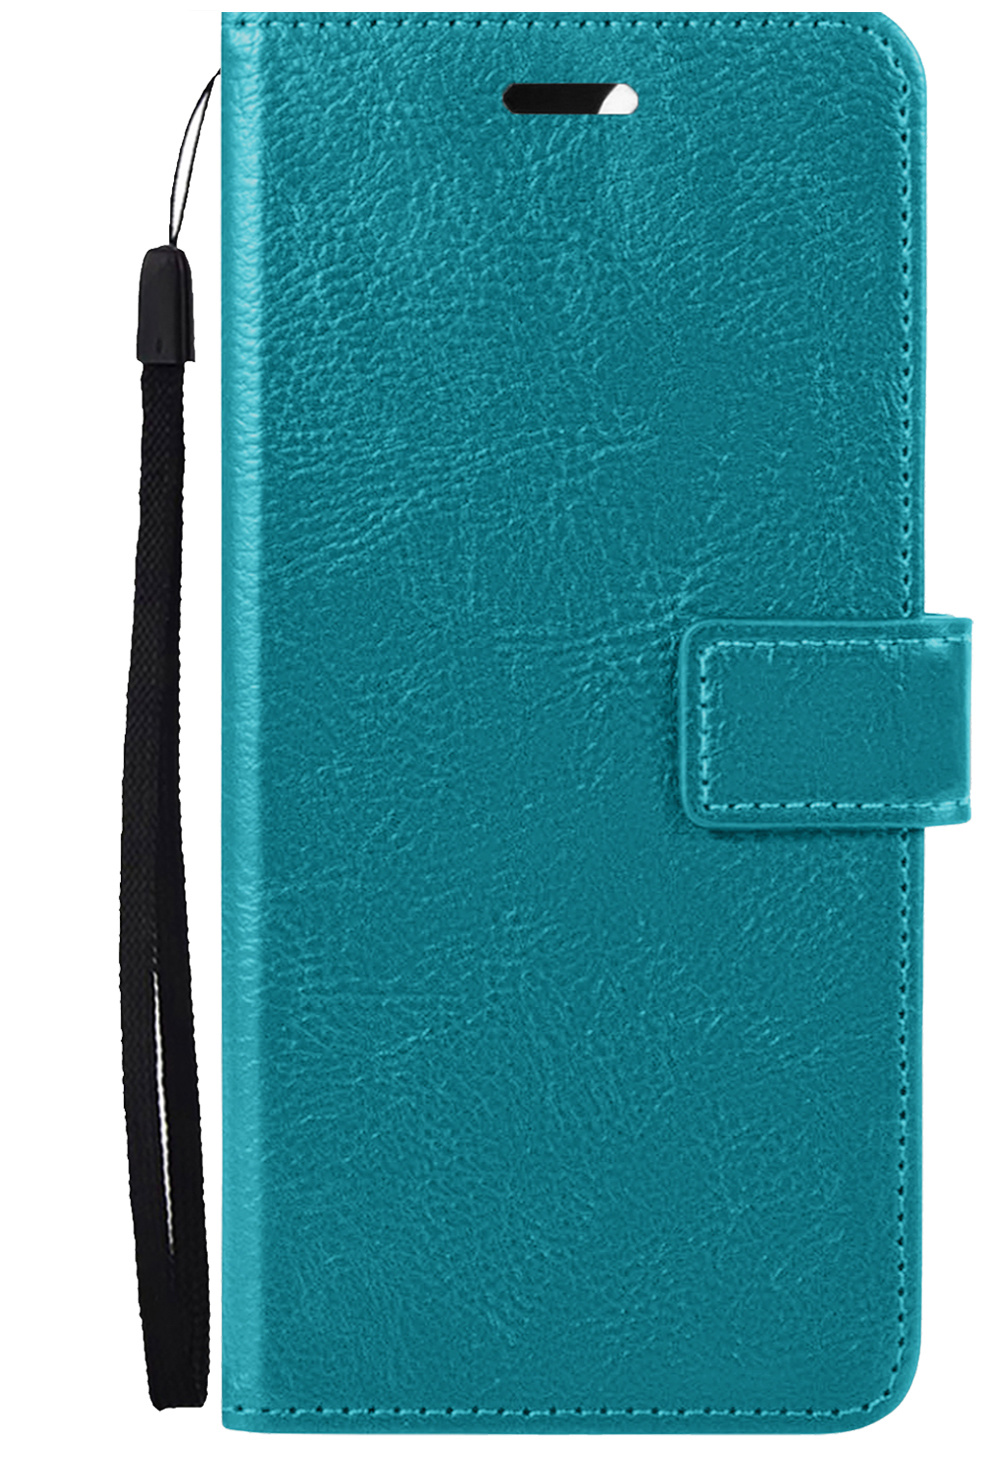 Nomfy Samsung Galaxy S21 FE Hoes Bookcase Turquoise - Samsung Galaxy S21 FE Book Cover Flipcase - Samsung Galaxy S21 FE Hoesje - Turquoise